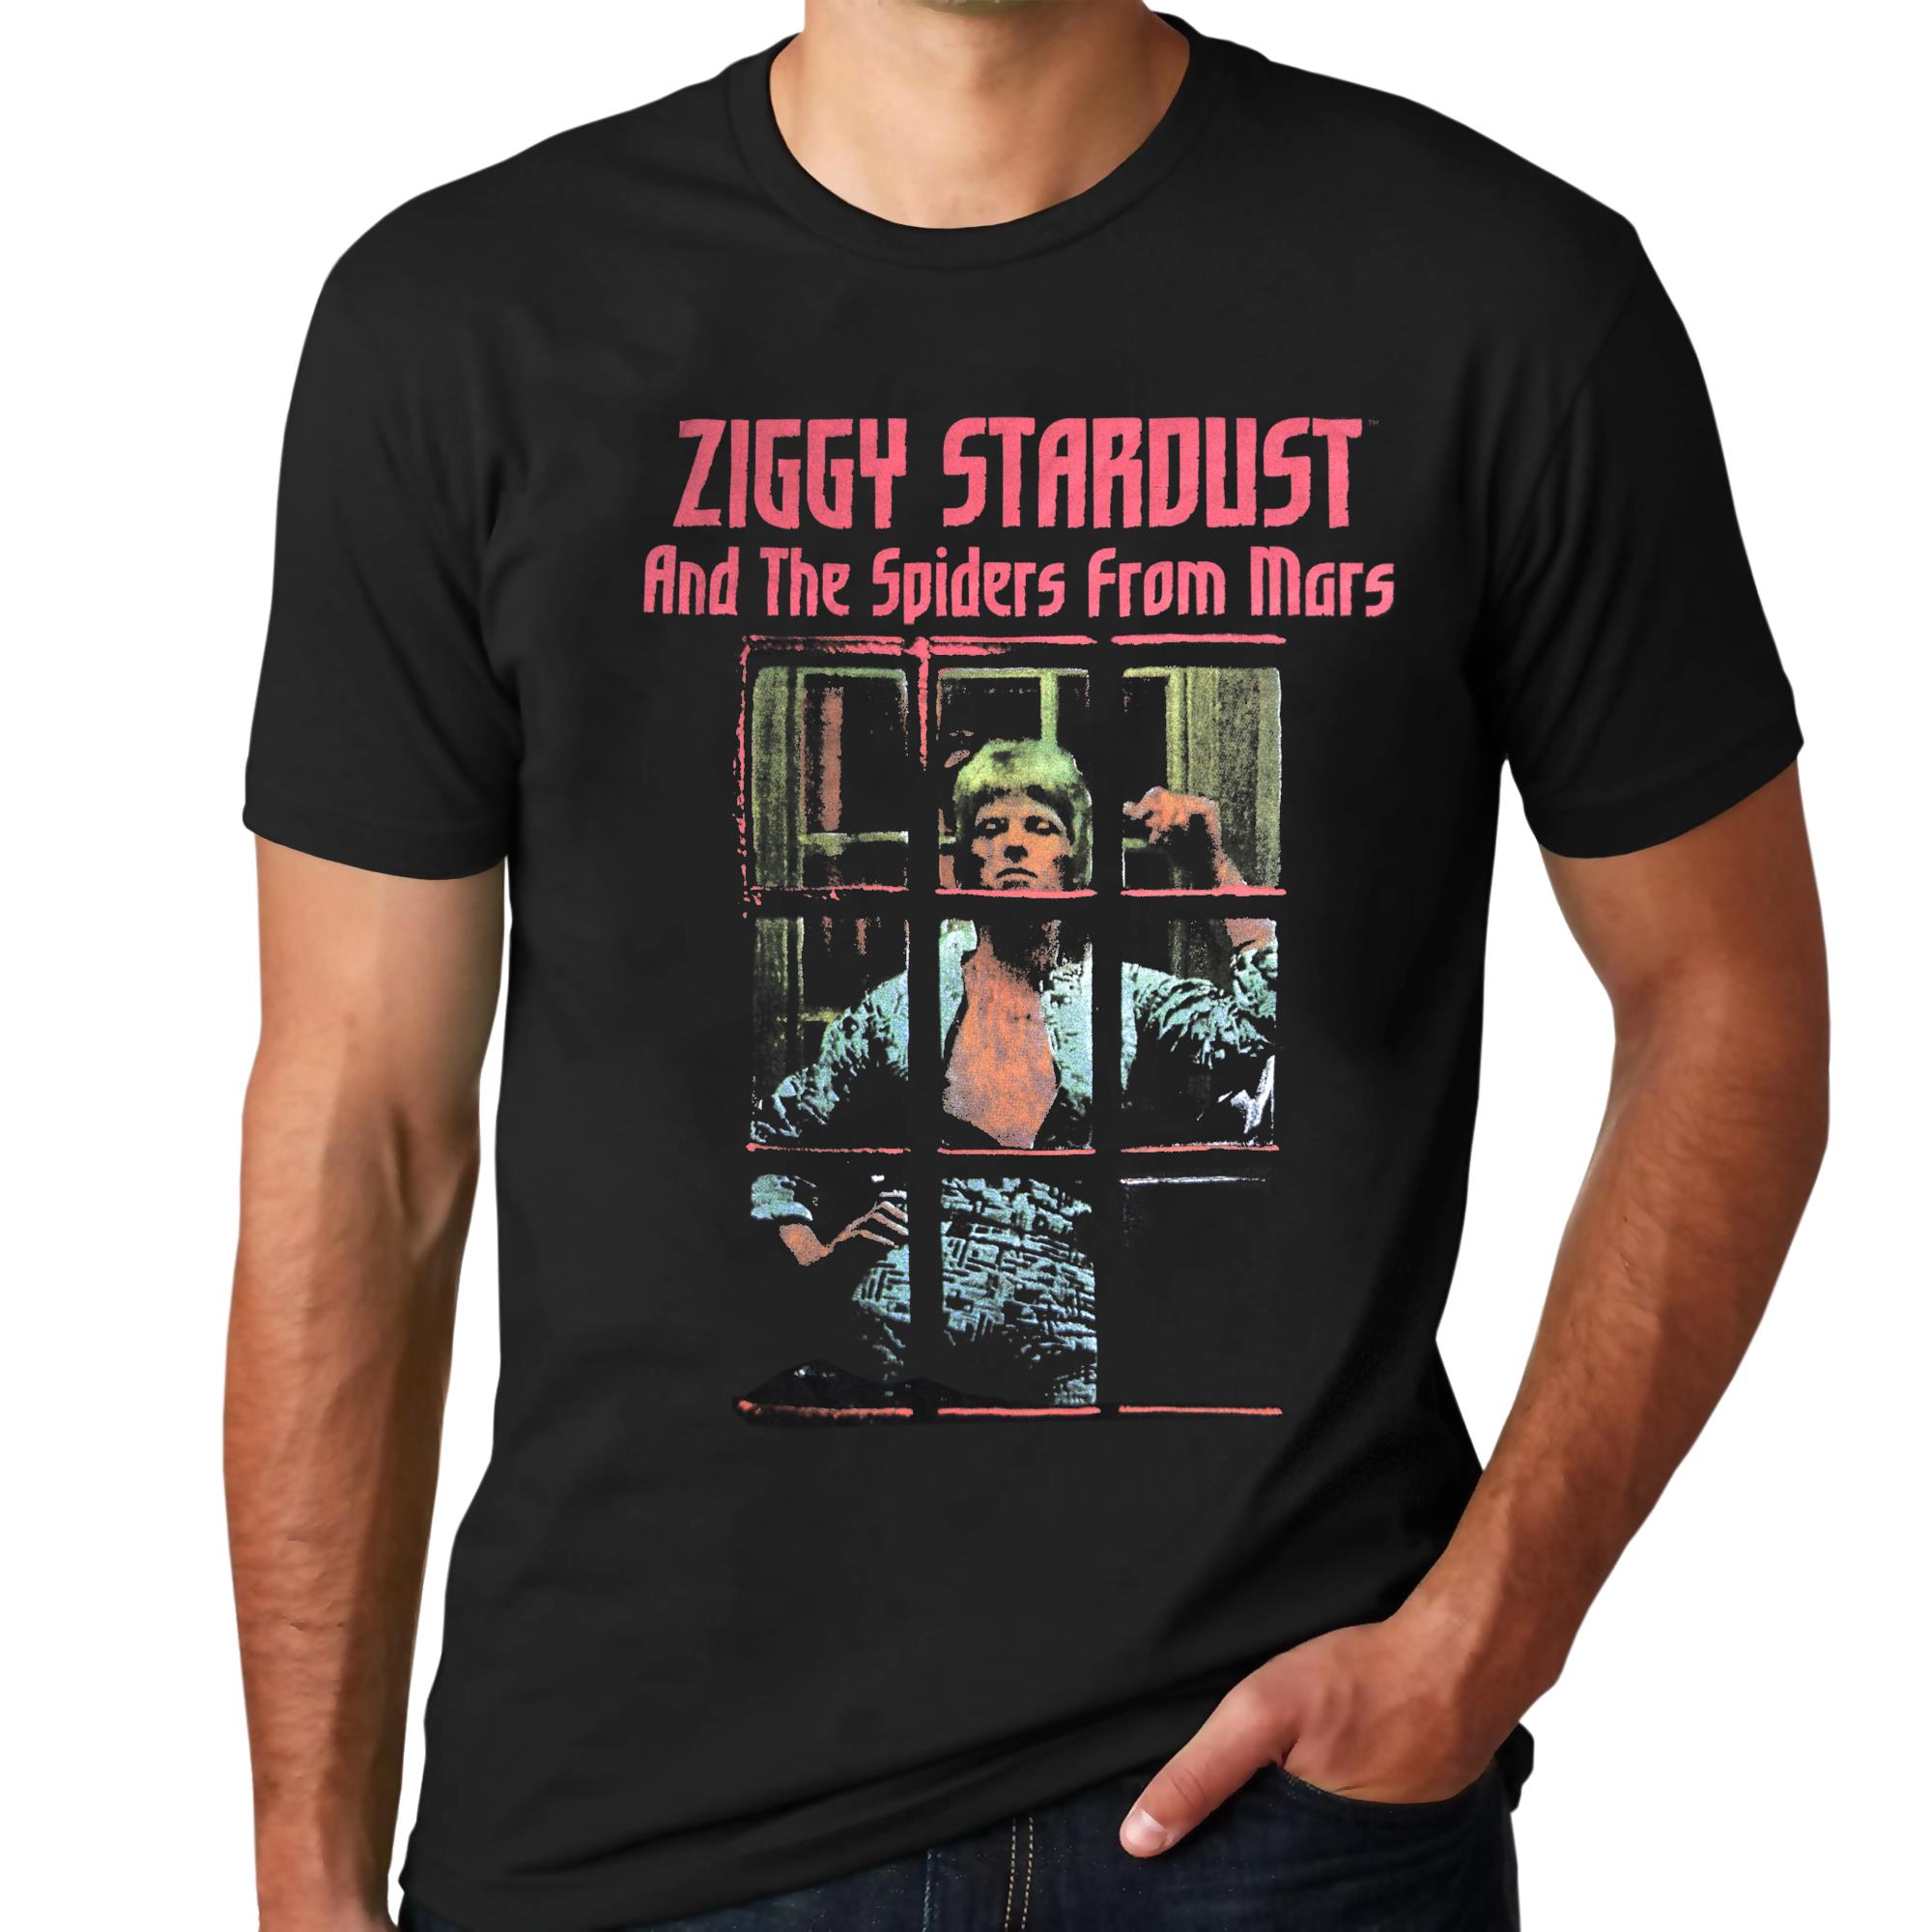 Ziggy Stardust and the Spiders from Mars T-Shirt